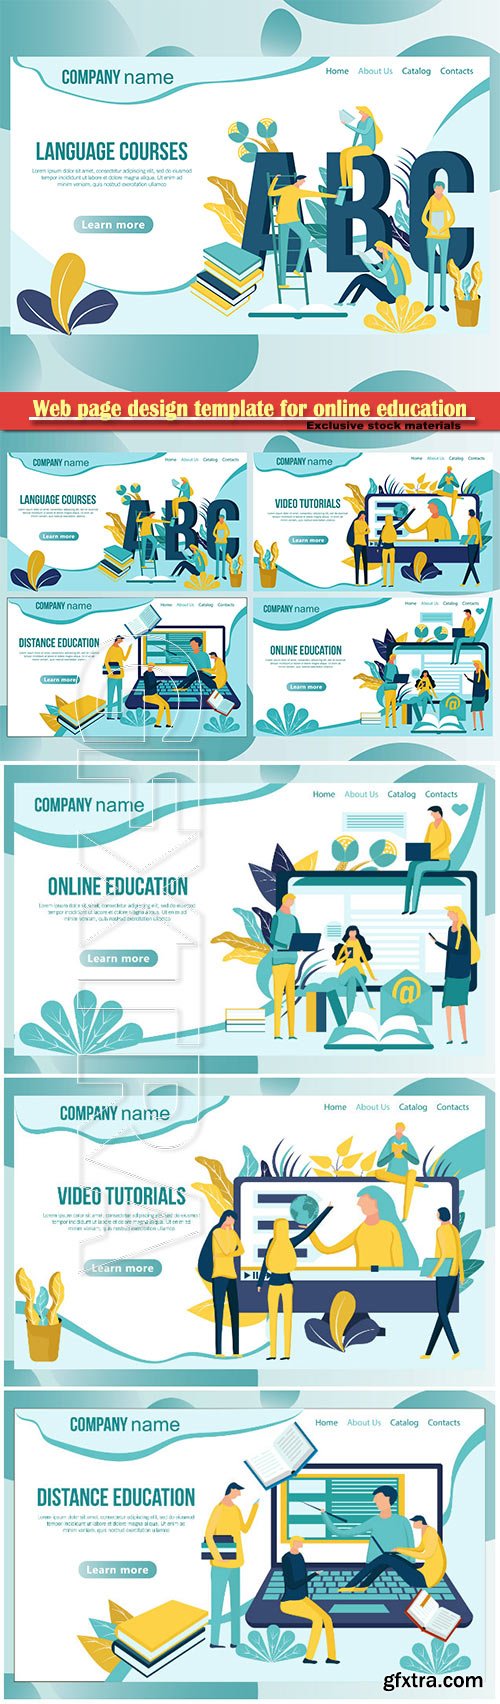 Web page design template for online education vector illustration